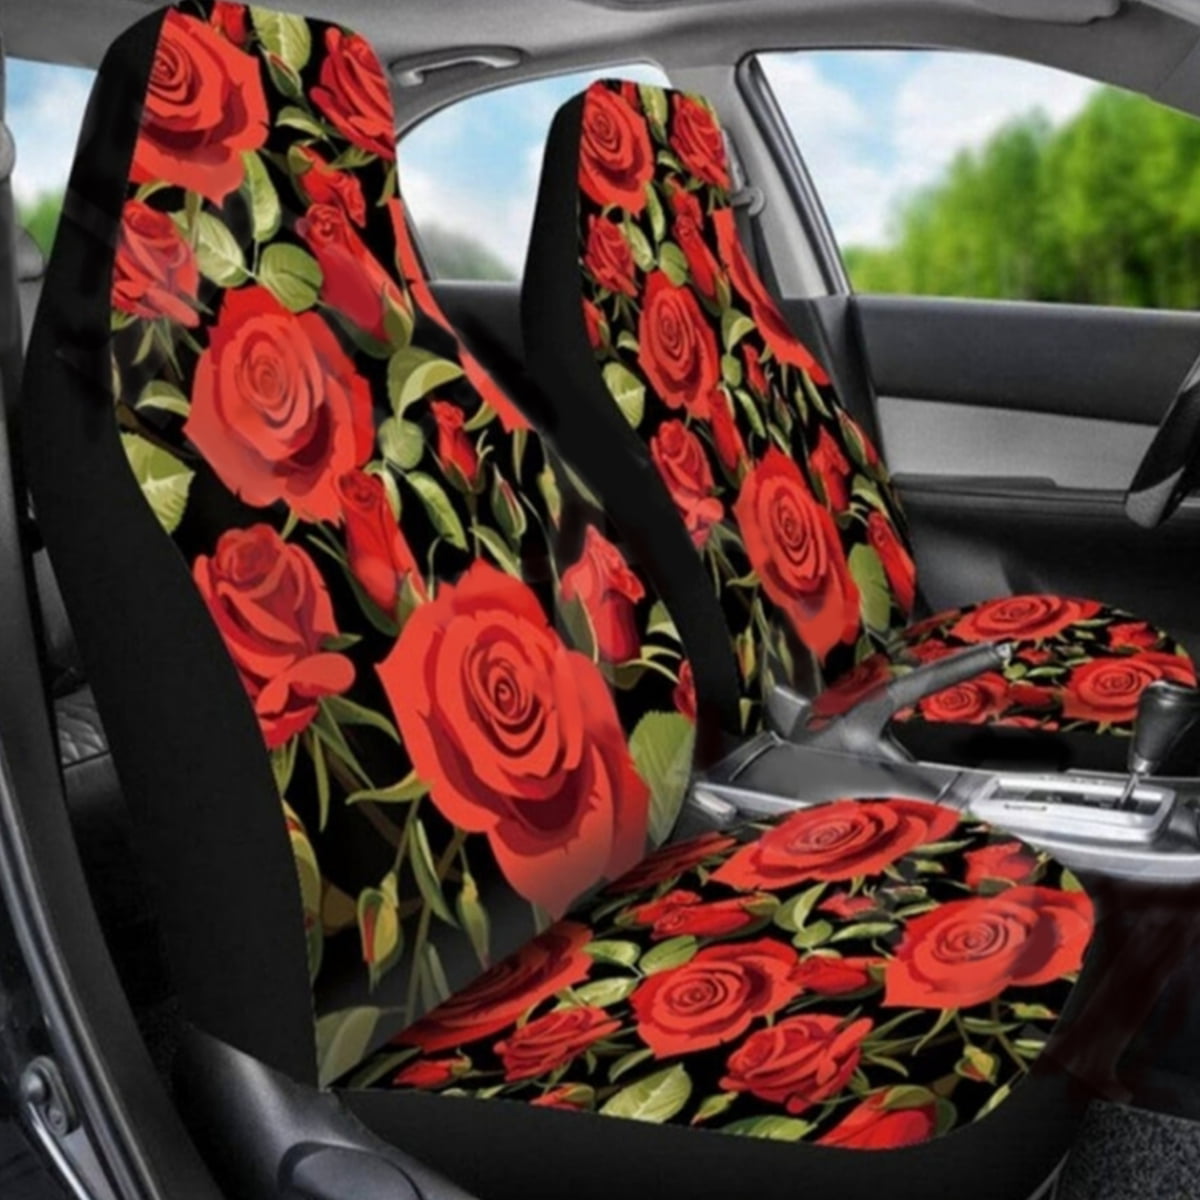 Flexible Elastic HUGS IDEA Daisy Flower Car Seat Cover Front Seats Only Full Set of 2 Sedan and Jeep Universal Fit for Vehicle